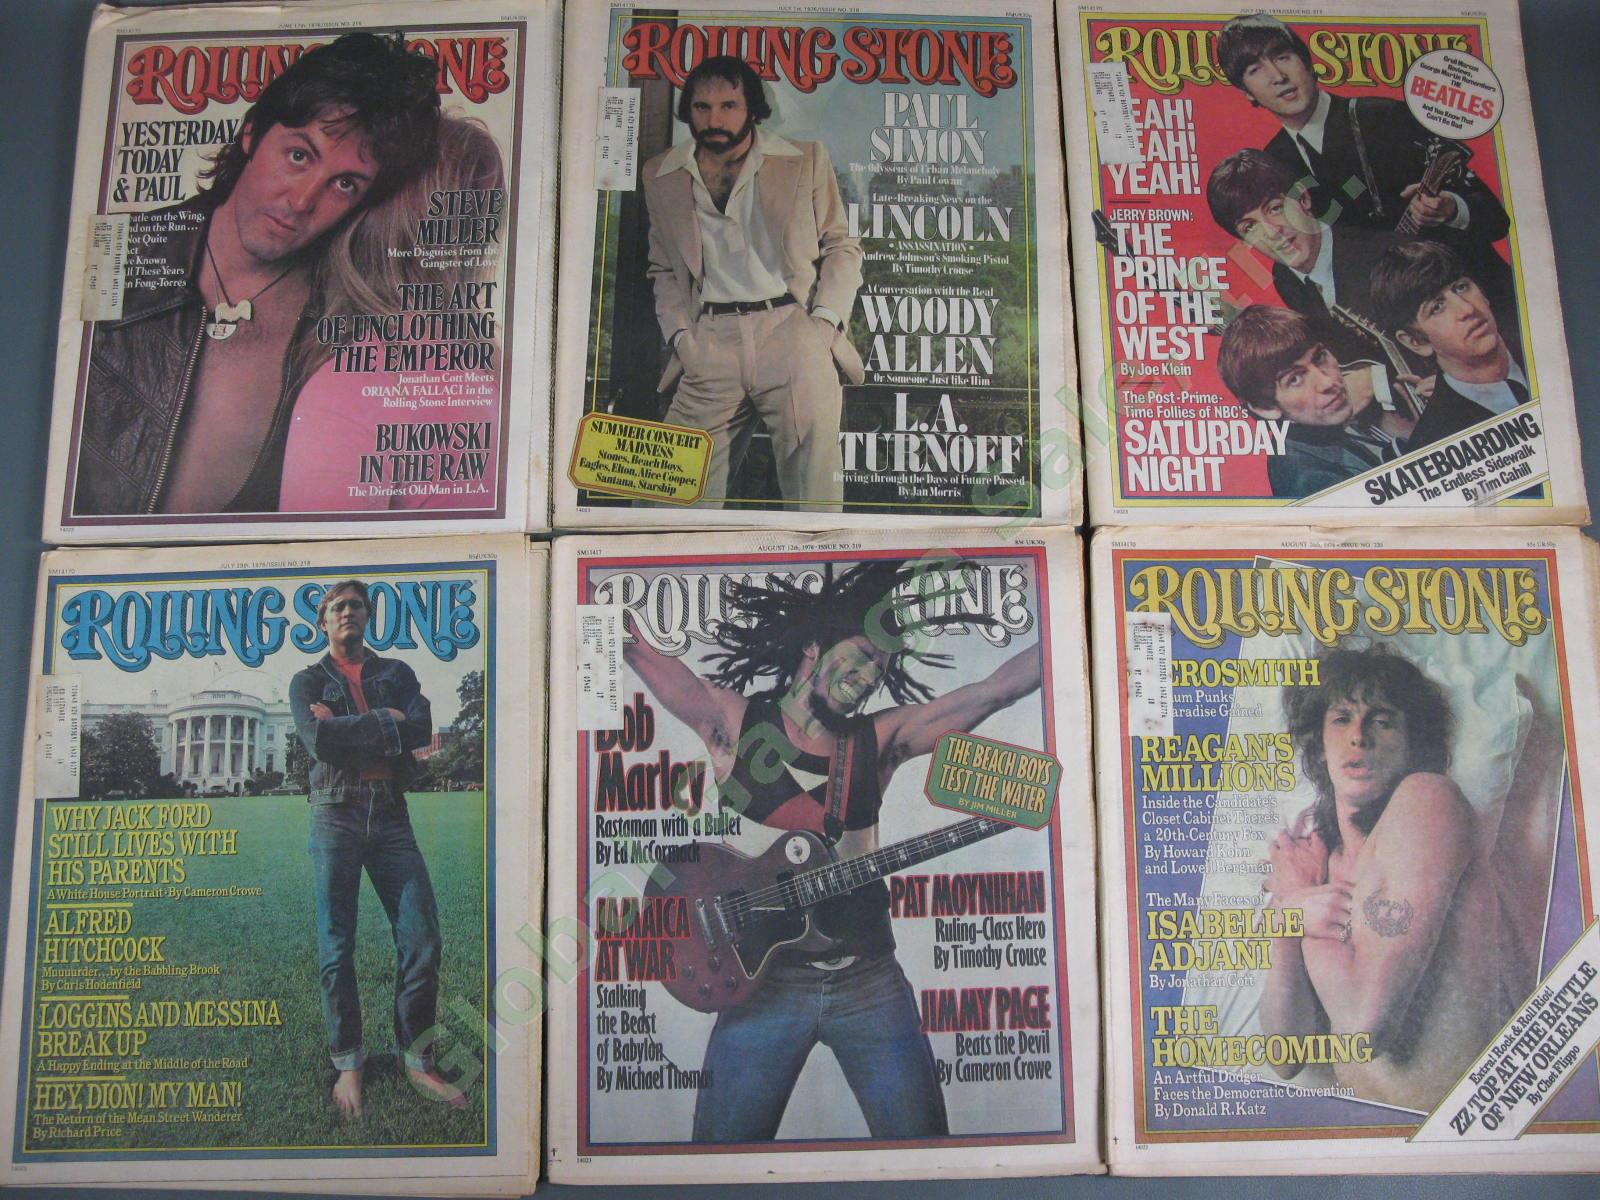 27 VINTAGE 1976 Rolling Stone Magazine SET Collection COMPLETE Full Year Run LOT 4